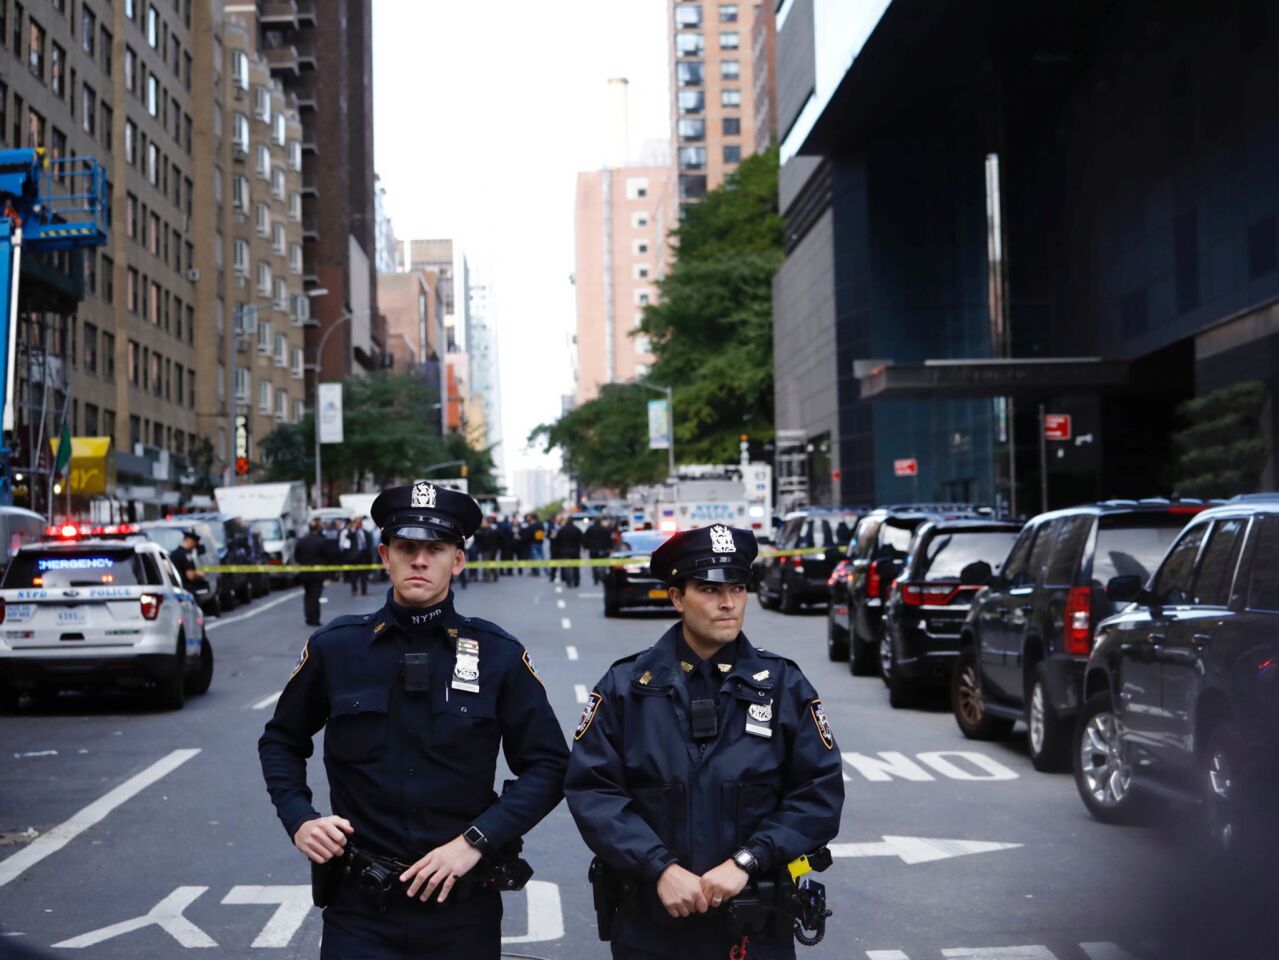 Police stand guard in a closed street after a bomb alert at the Time Warner offices in New York. Police were called to a suspicious package sent to the Time Warner building in which CNN is located.